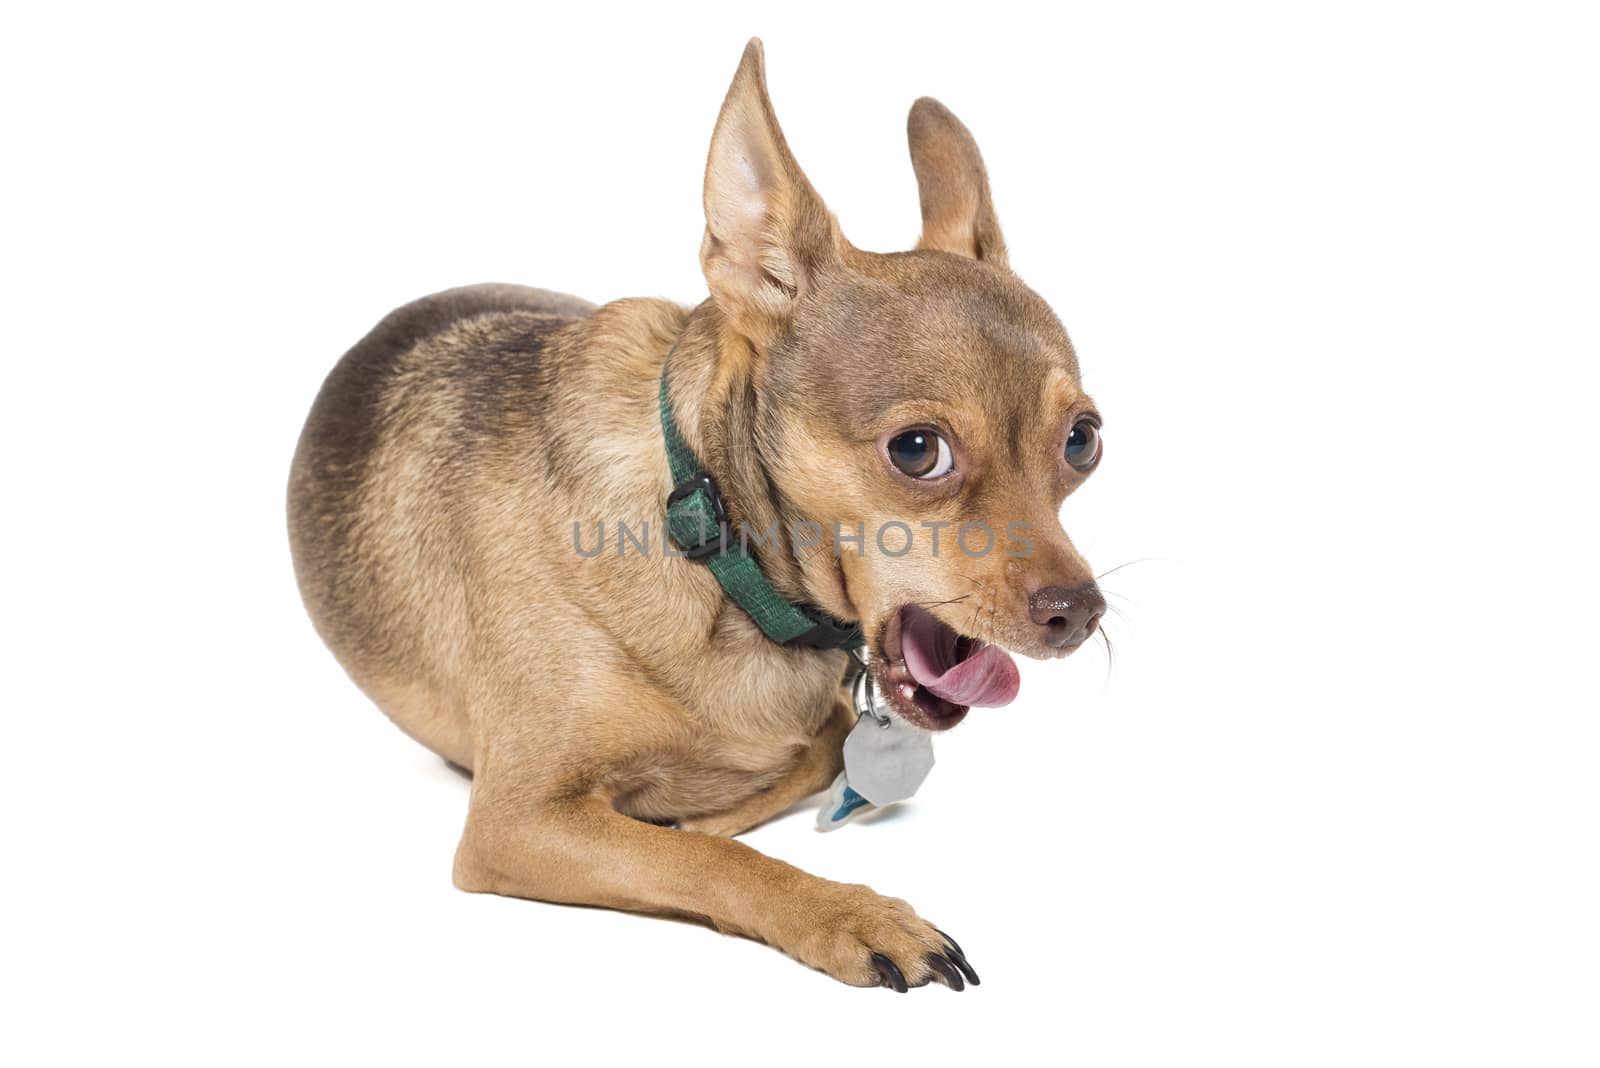 Yawning chihuahua dog isolated against a white background by Njean